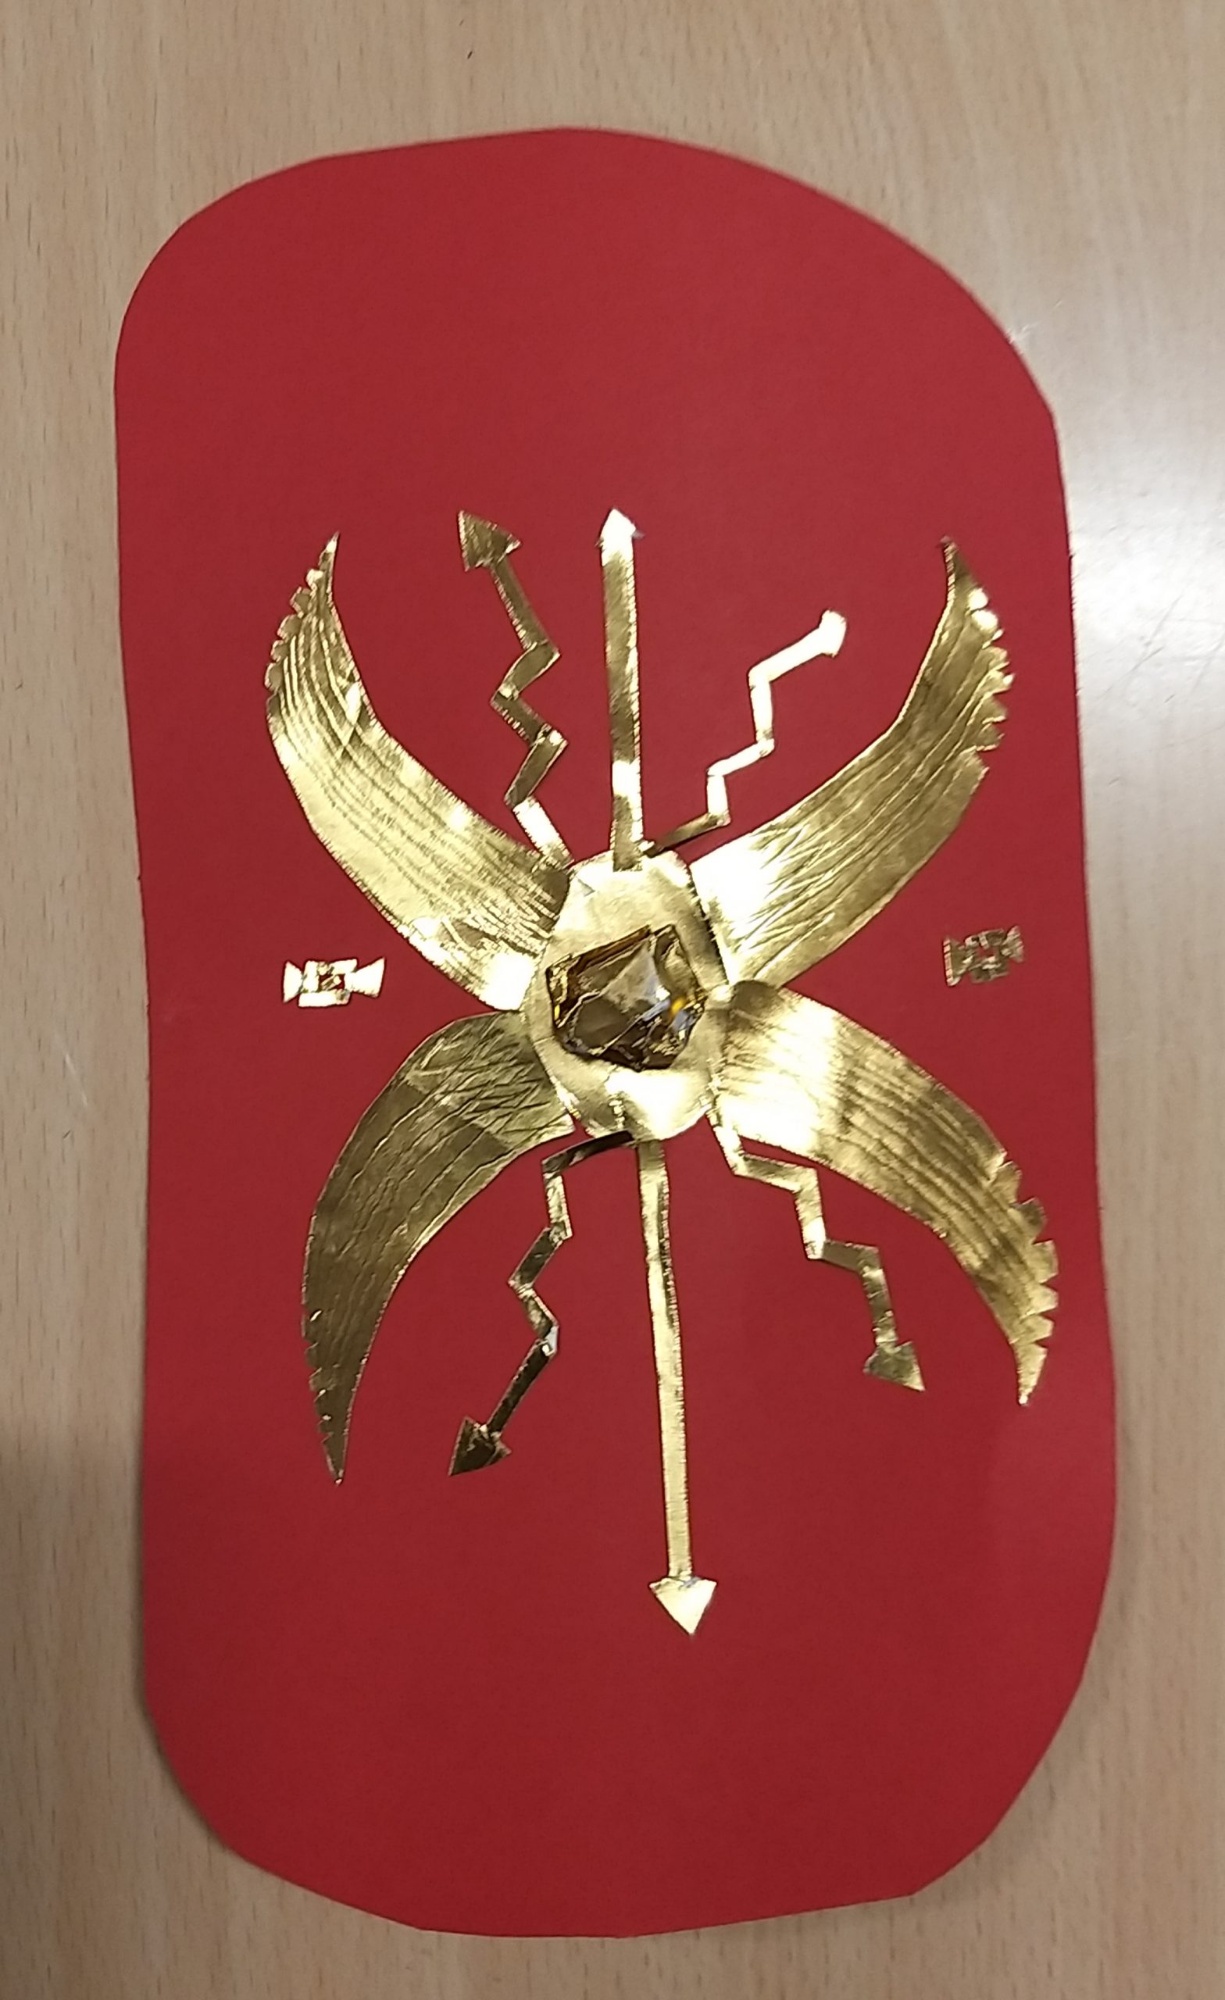 Roman shield, designed by a child, shows a detailed and decorative gold design on a red, oblong shaped shield.